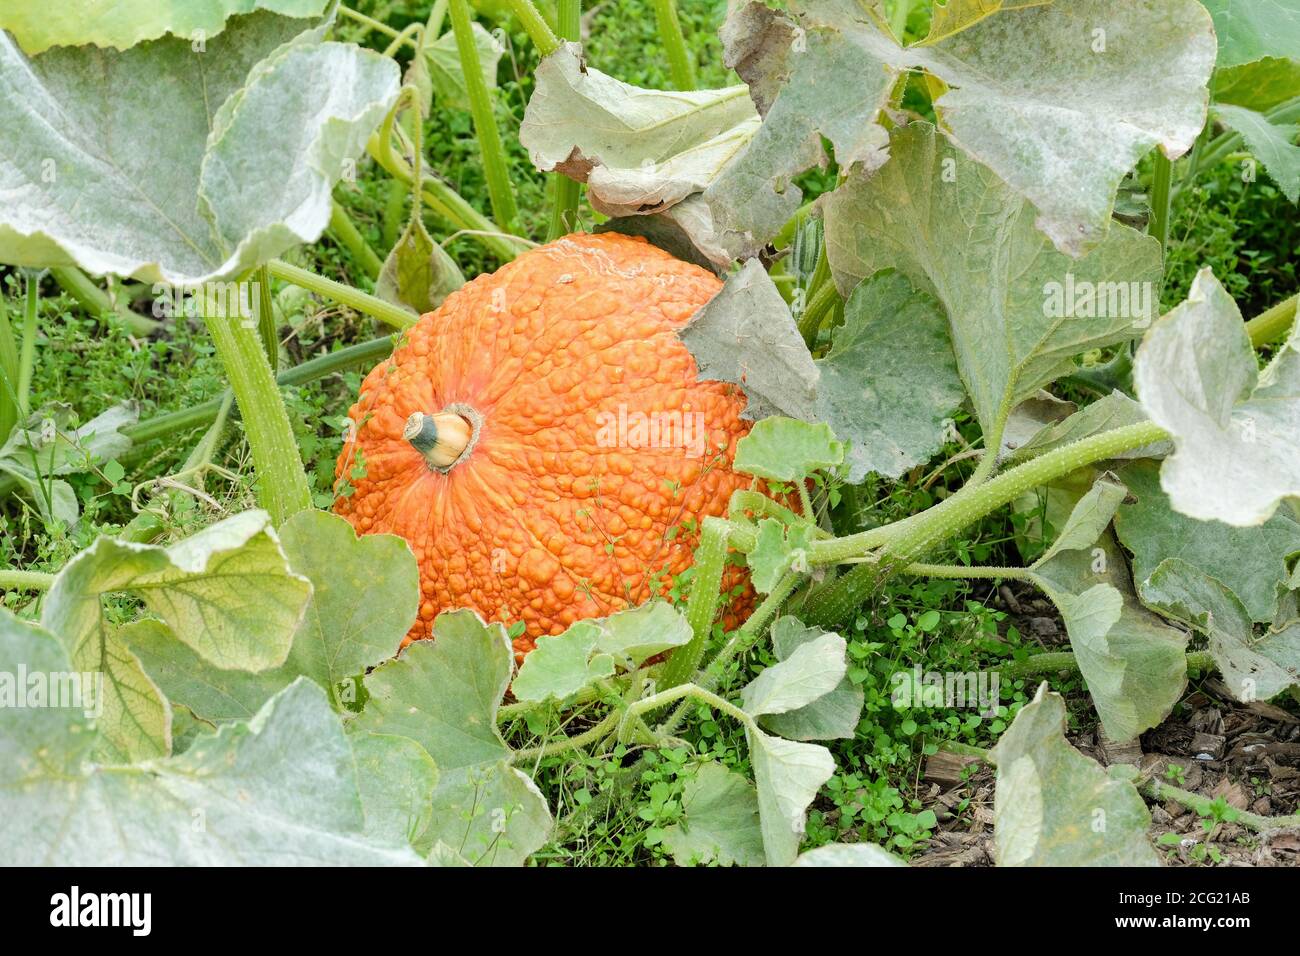 Bumpy, thick, red-orange skin of Pumpkin 'Red Warty Thing'. Cucurbita maxima 'Red Warty Thing'. 'Red Warty Thing' squash growing Stock Photo